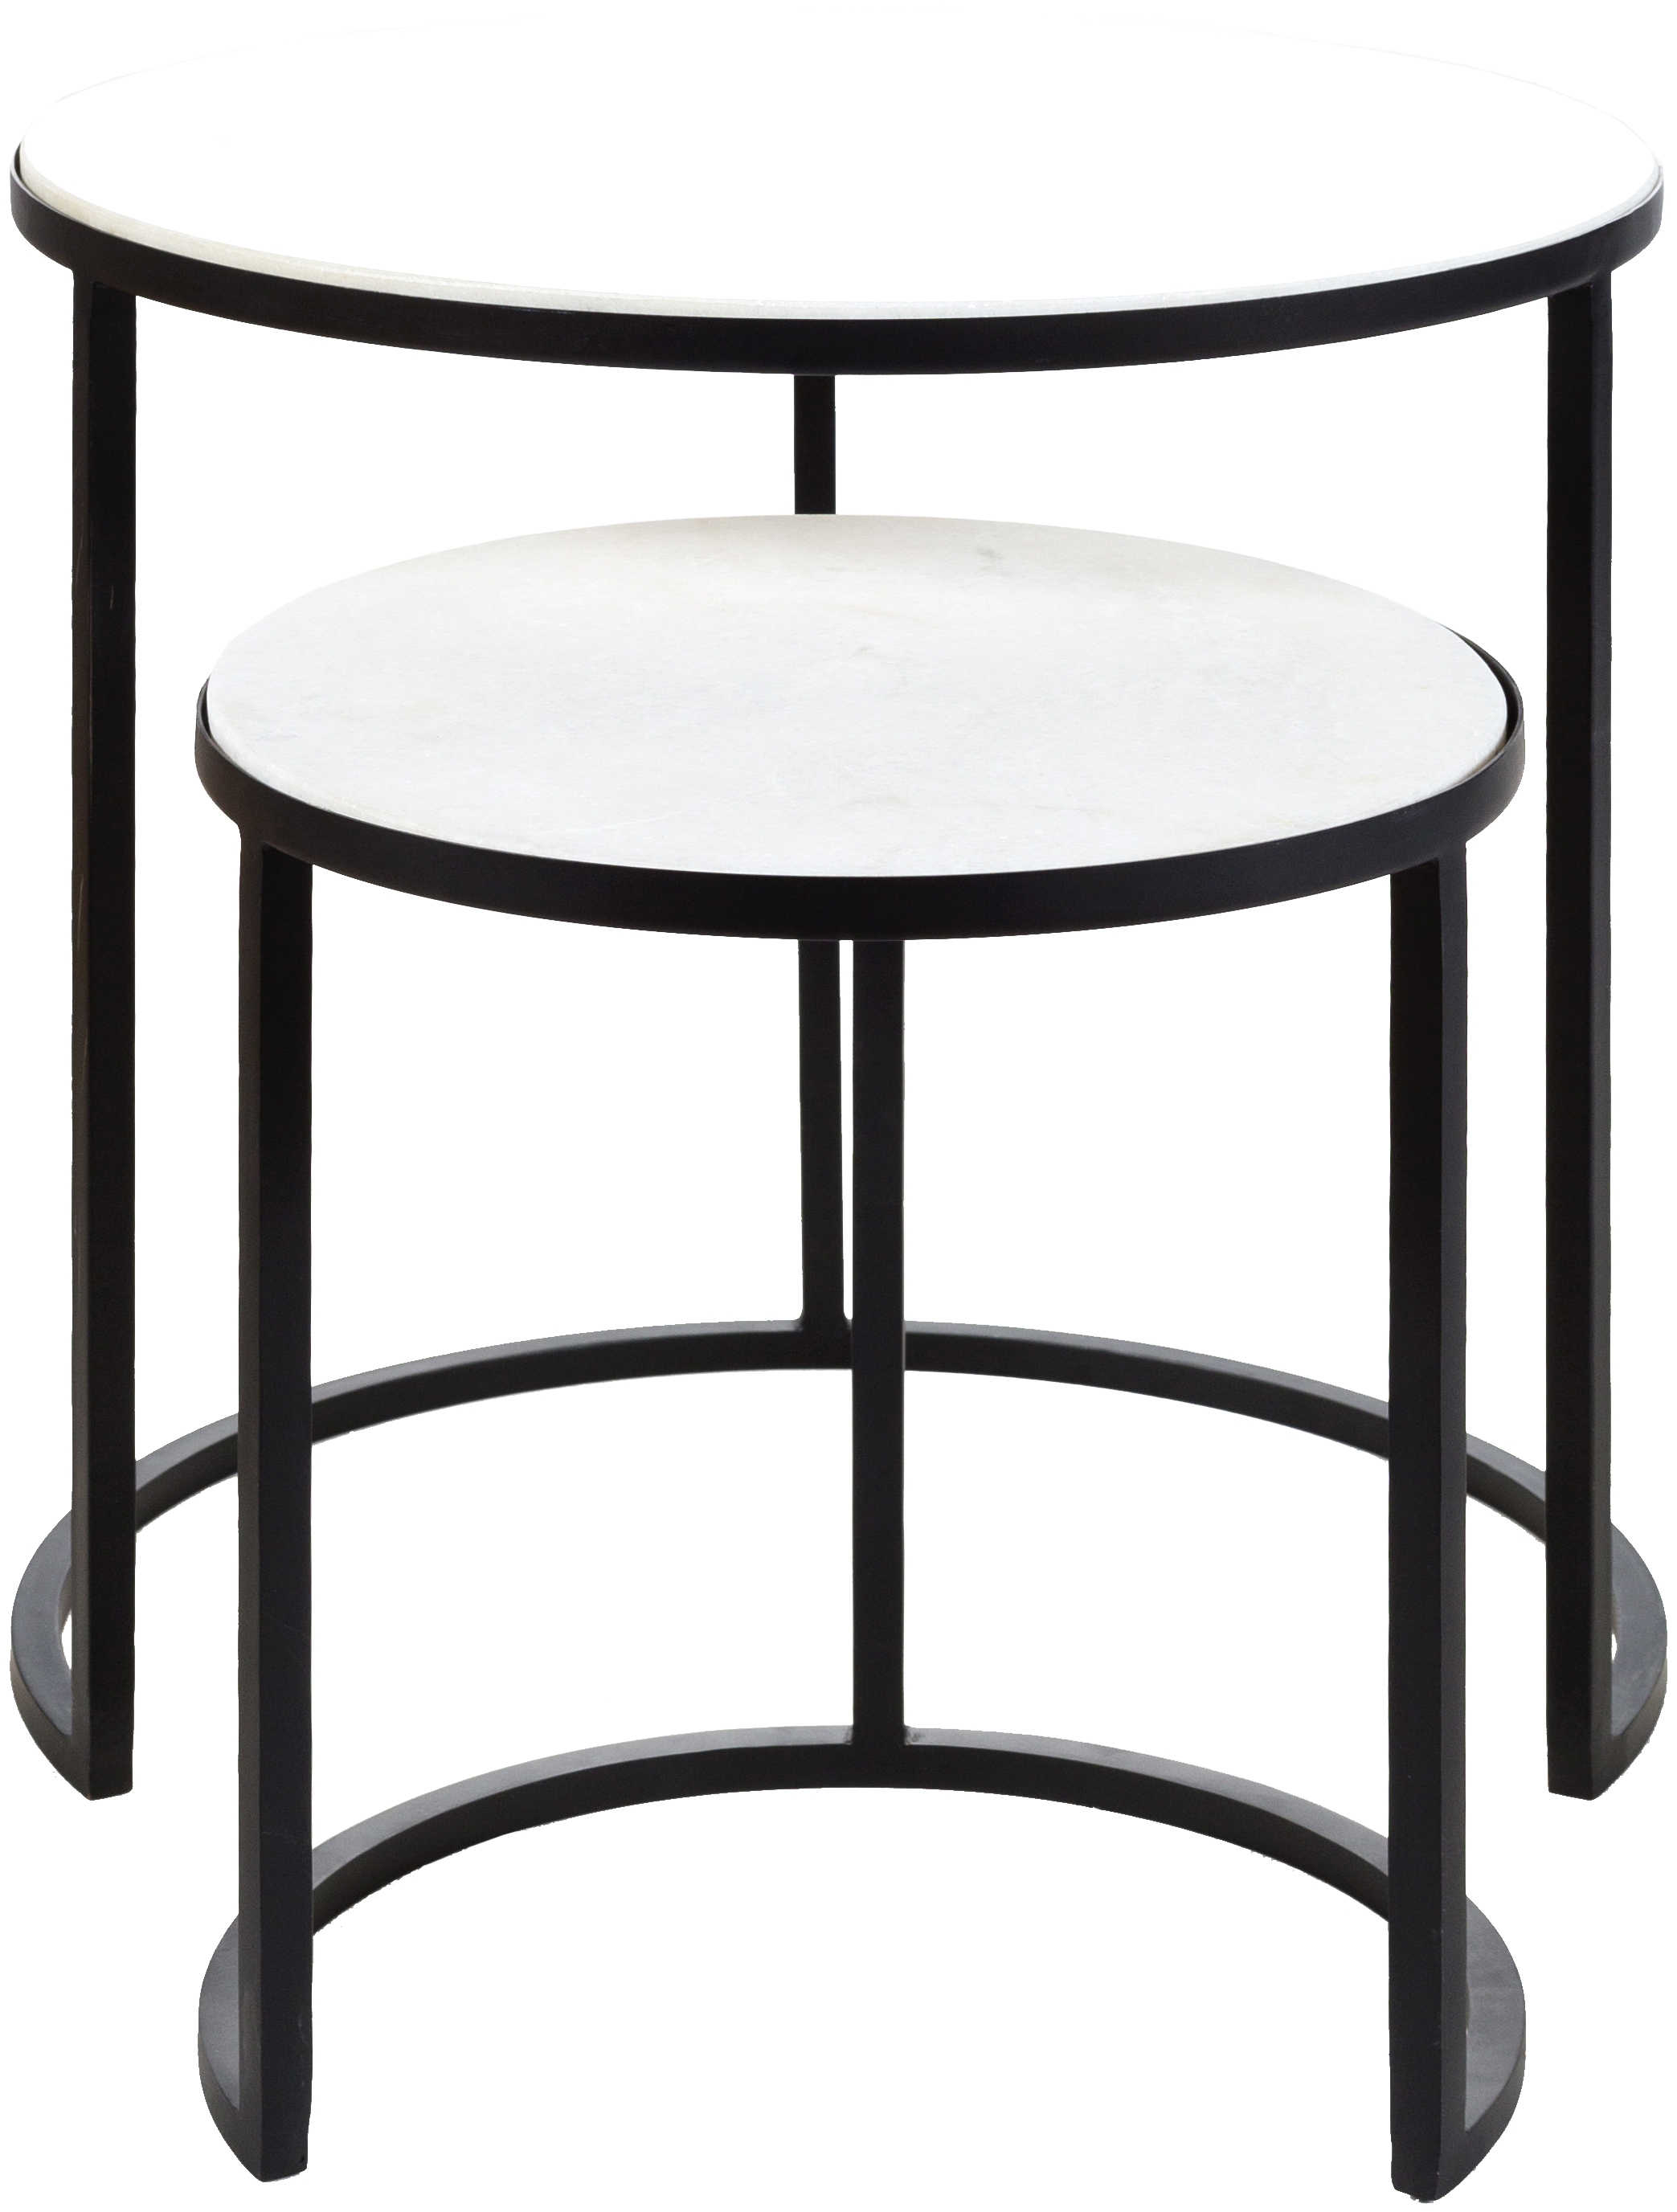 Brysen Nesting Tables, Set of 2 - Image 3